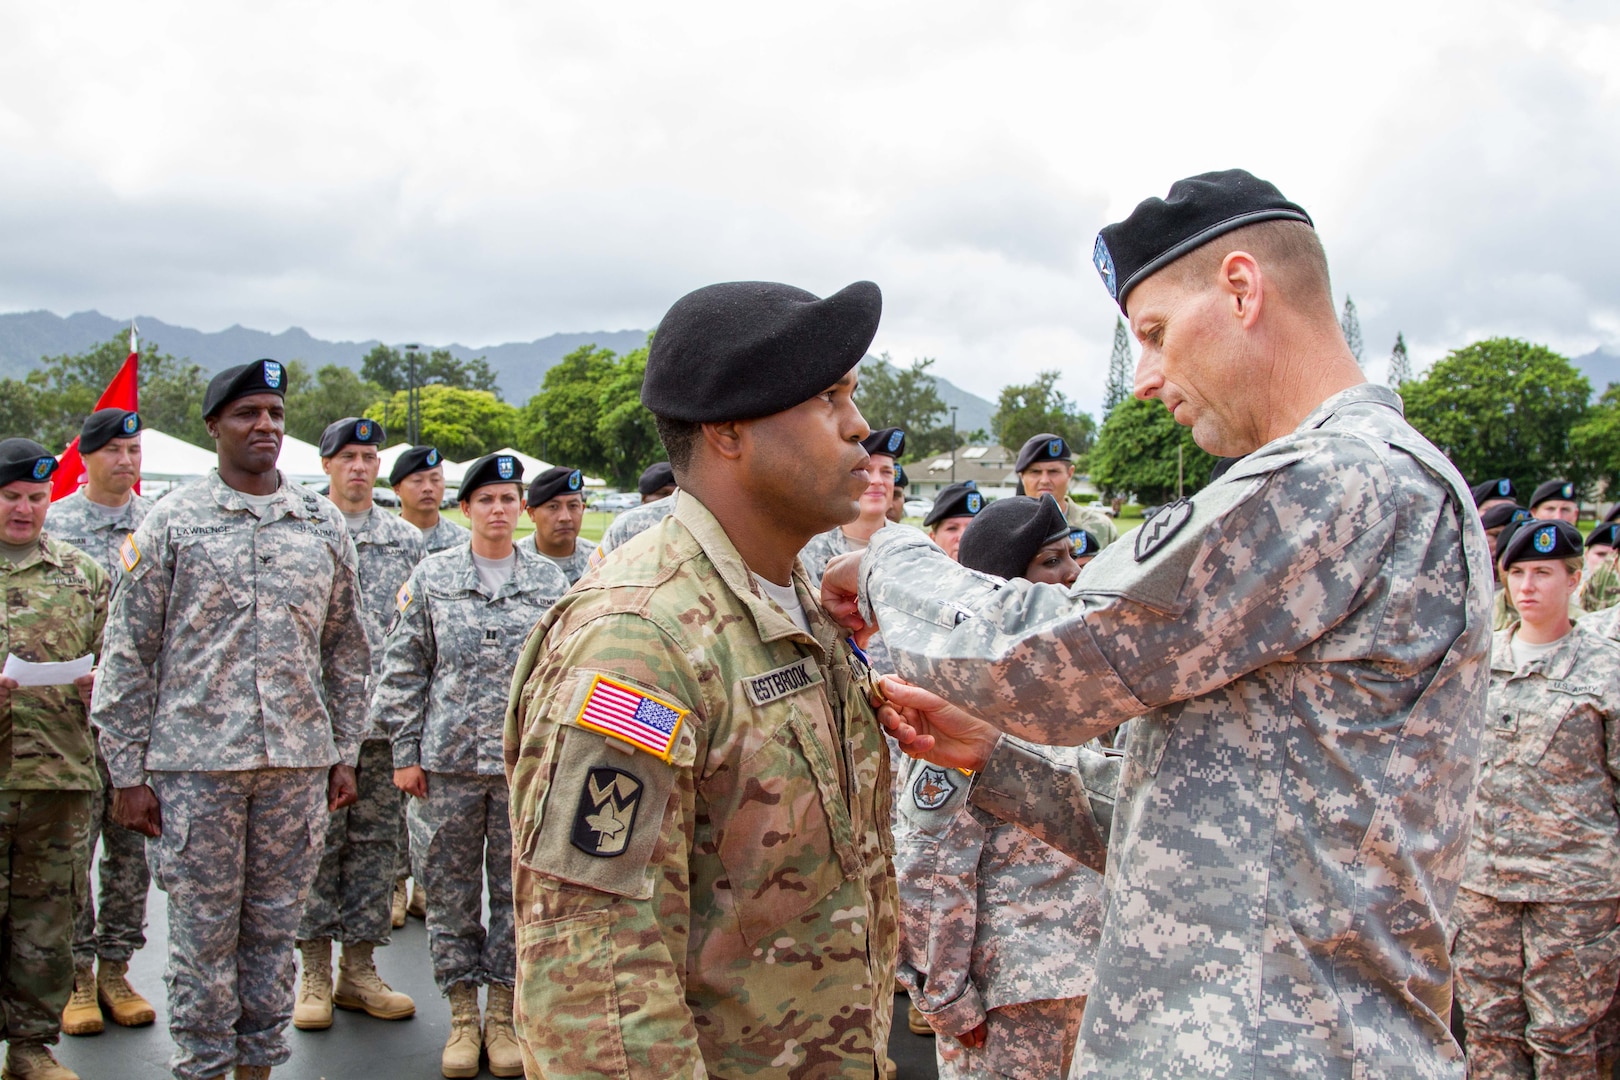 SCHOFIELD BARRACKS, Hawaii - The 25th Infantry Division's Deputy Commanding General-Support, Brig. Gen. Patrick Matlock, pins the Soldier's Medal to Sgt. Jonathan Westbrook's uniform during a ceremony at Weyand Field, Oct. 7, 2015. Westbrook received the prestigious medal for his heroic actions during the Fort Hood, Texas, shooting April 2, 2014. 